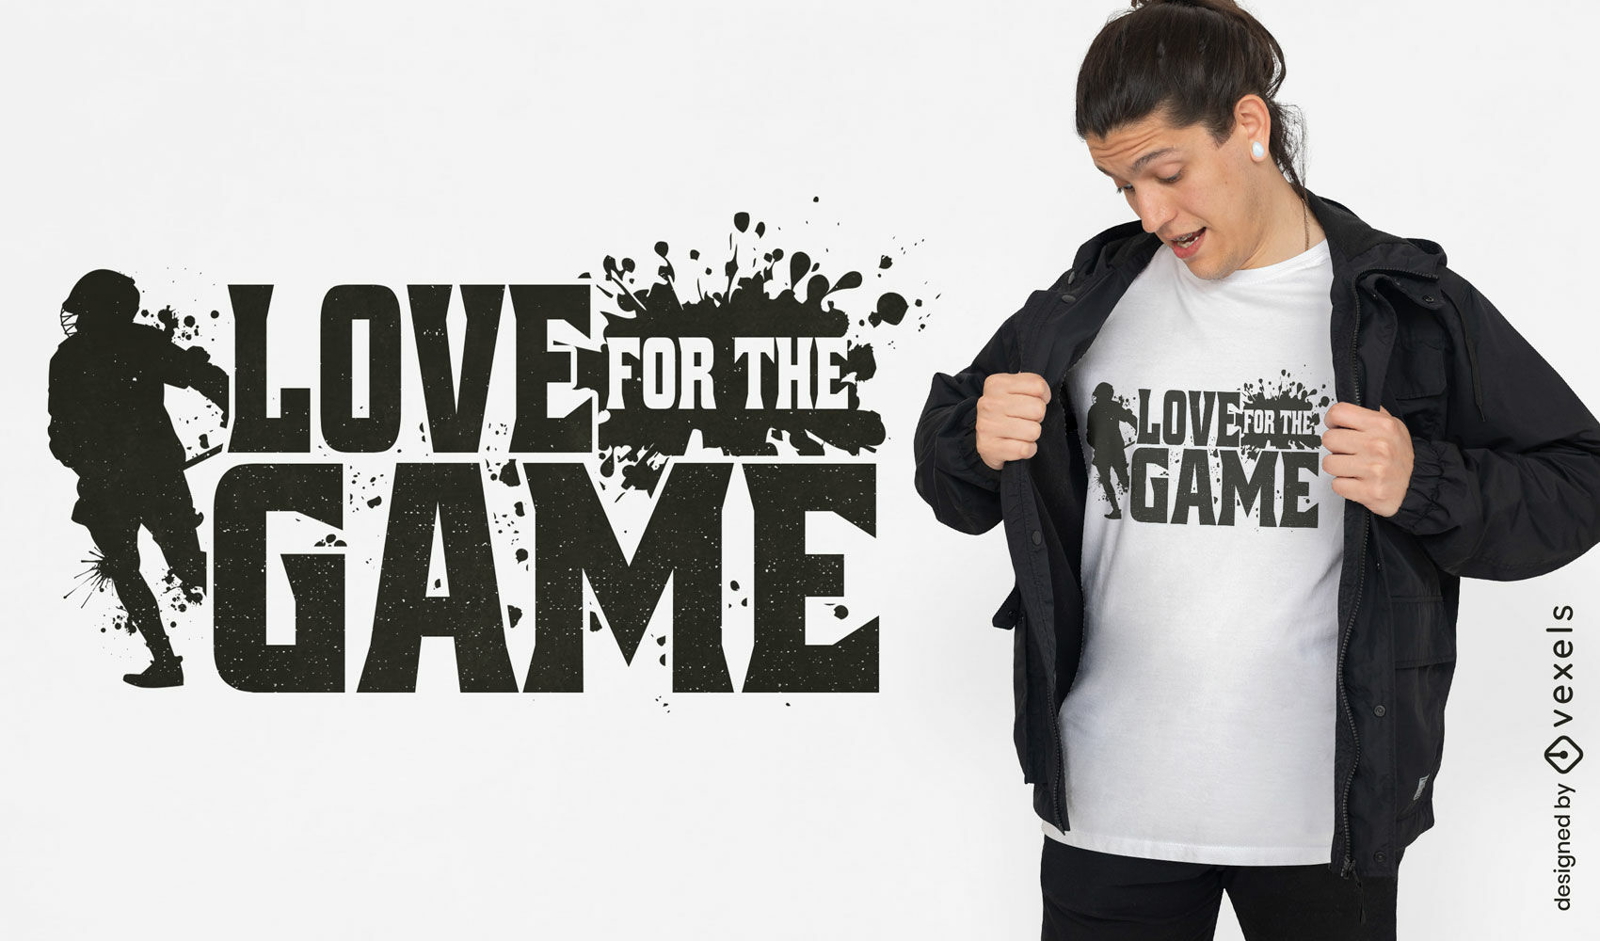 Love for the game t-shirt design